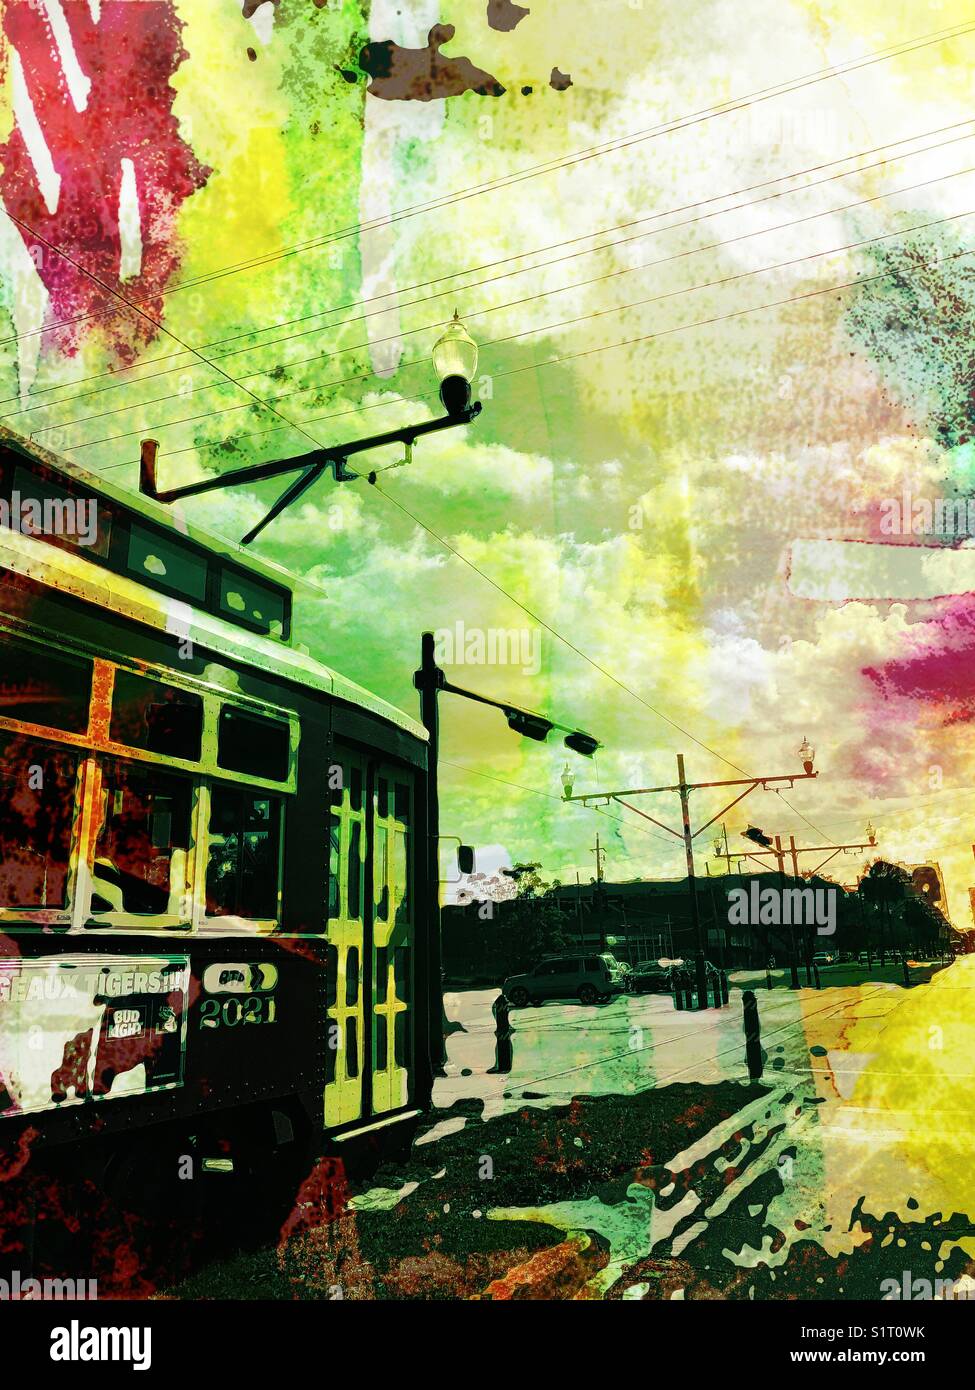 Urban styled image of New Orleans streetcar scene Stock Photo